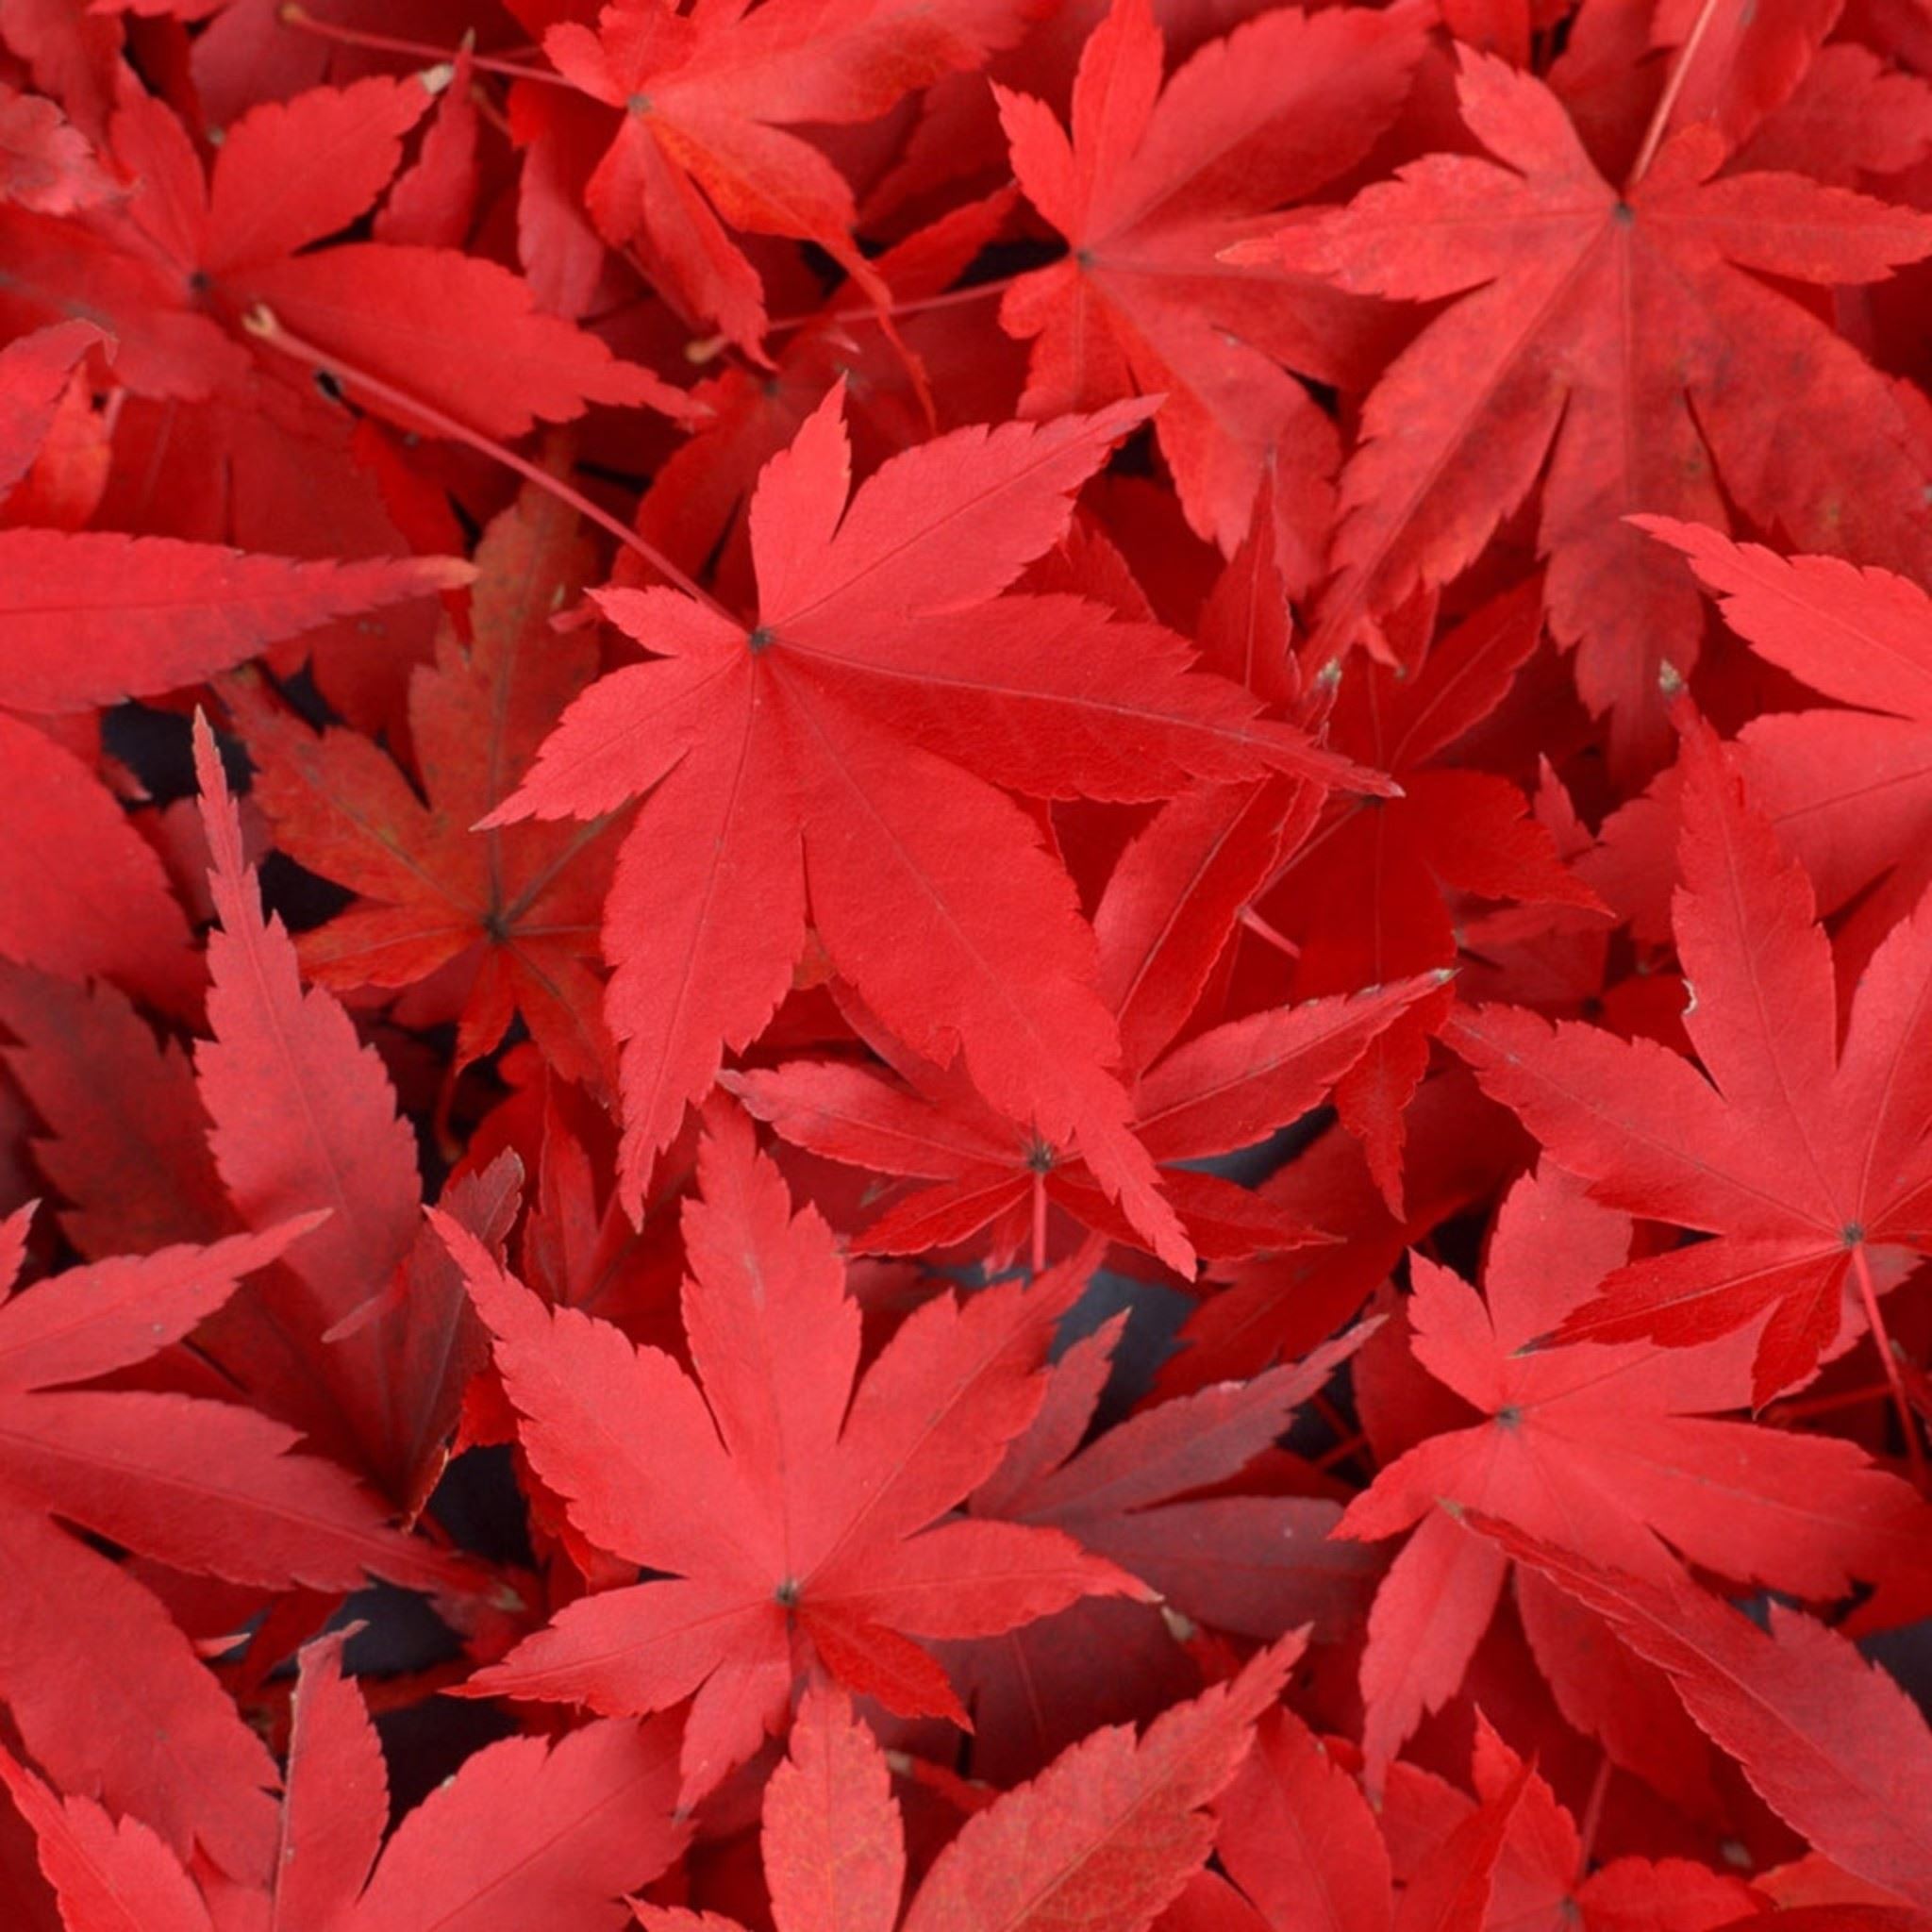 Pure Autumn Red Maple Leaves Overlap iPad Air wallpaper 